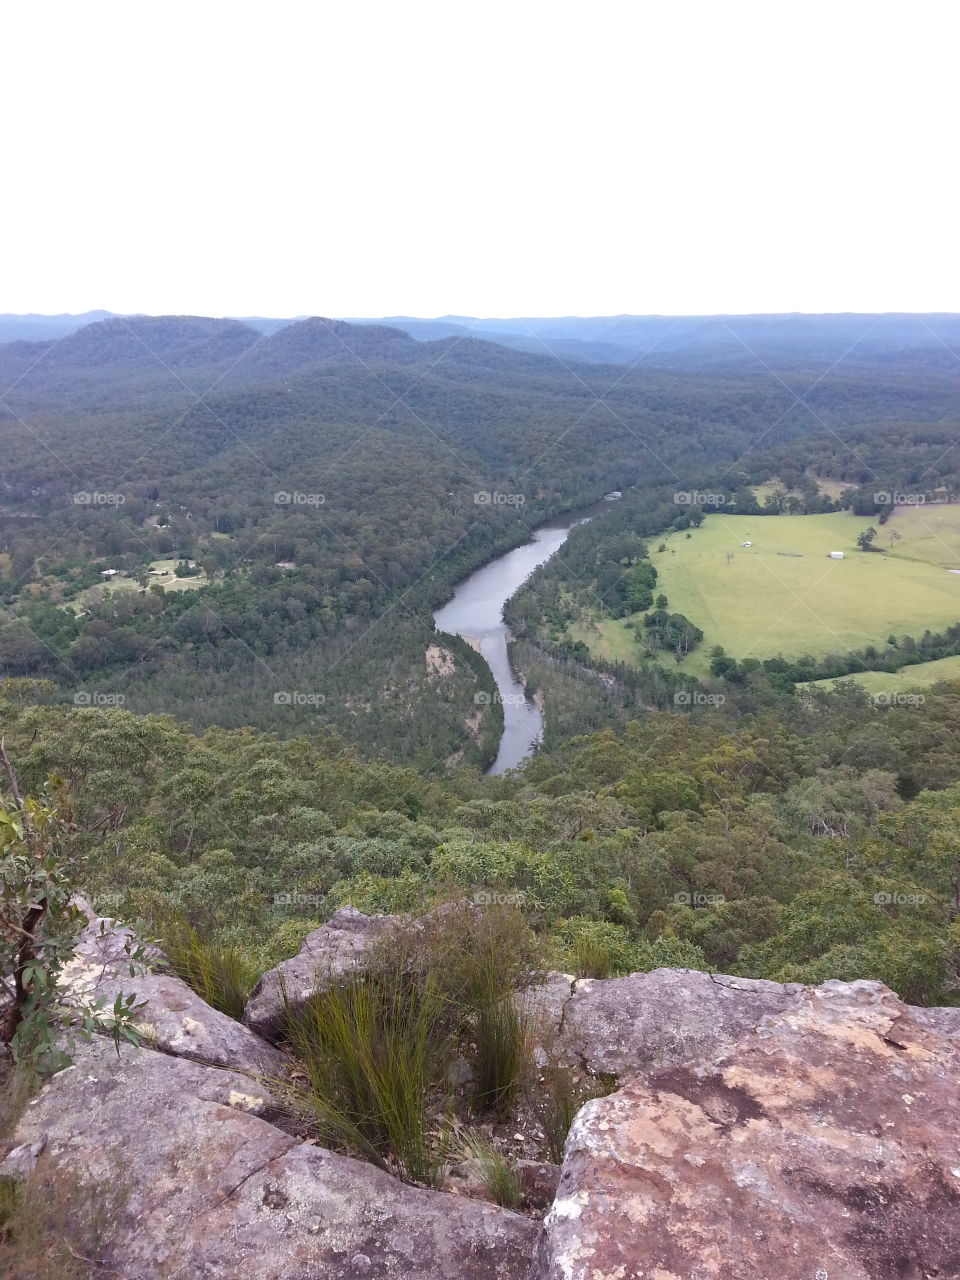 Shoalhaven River from Budgong